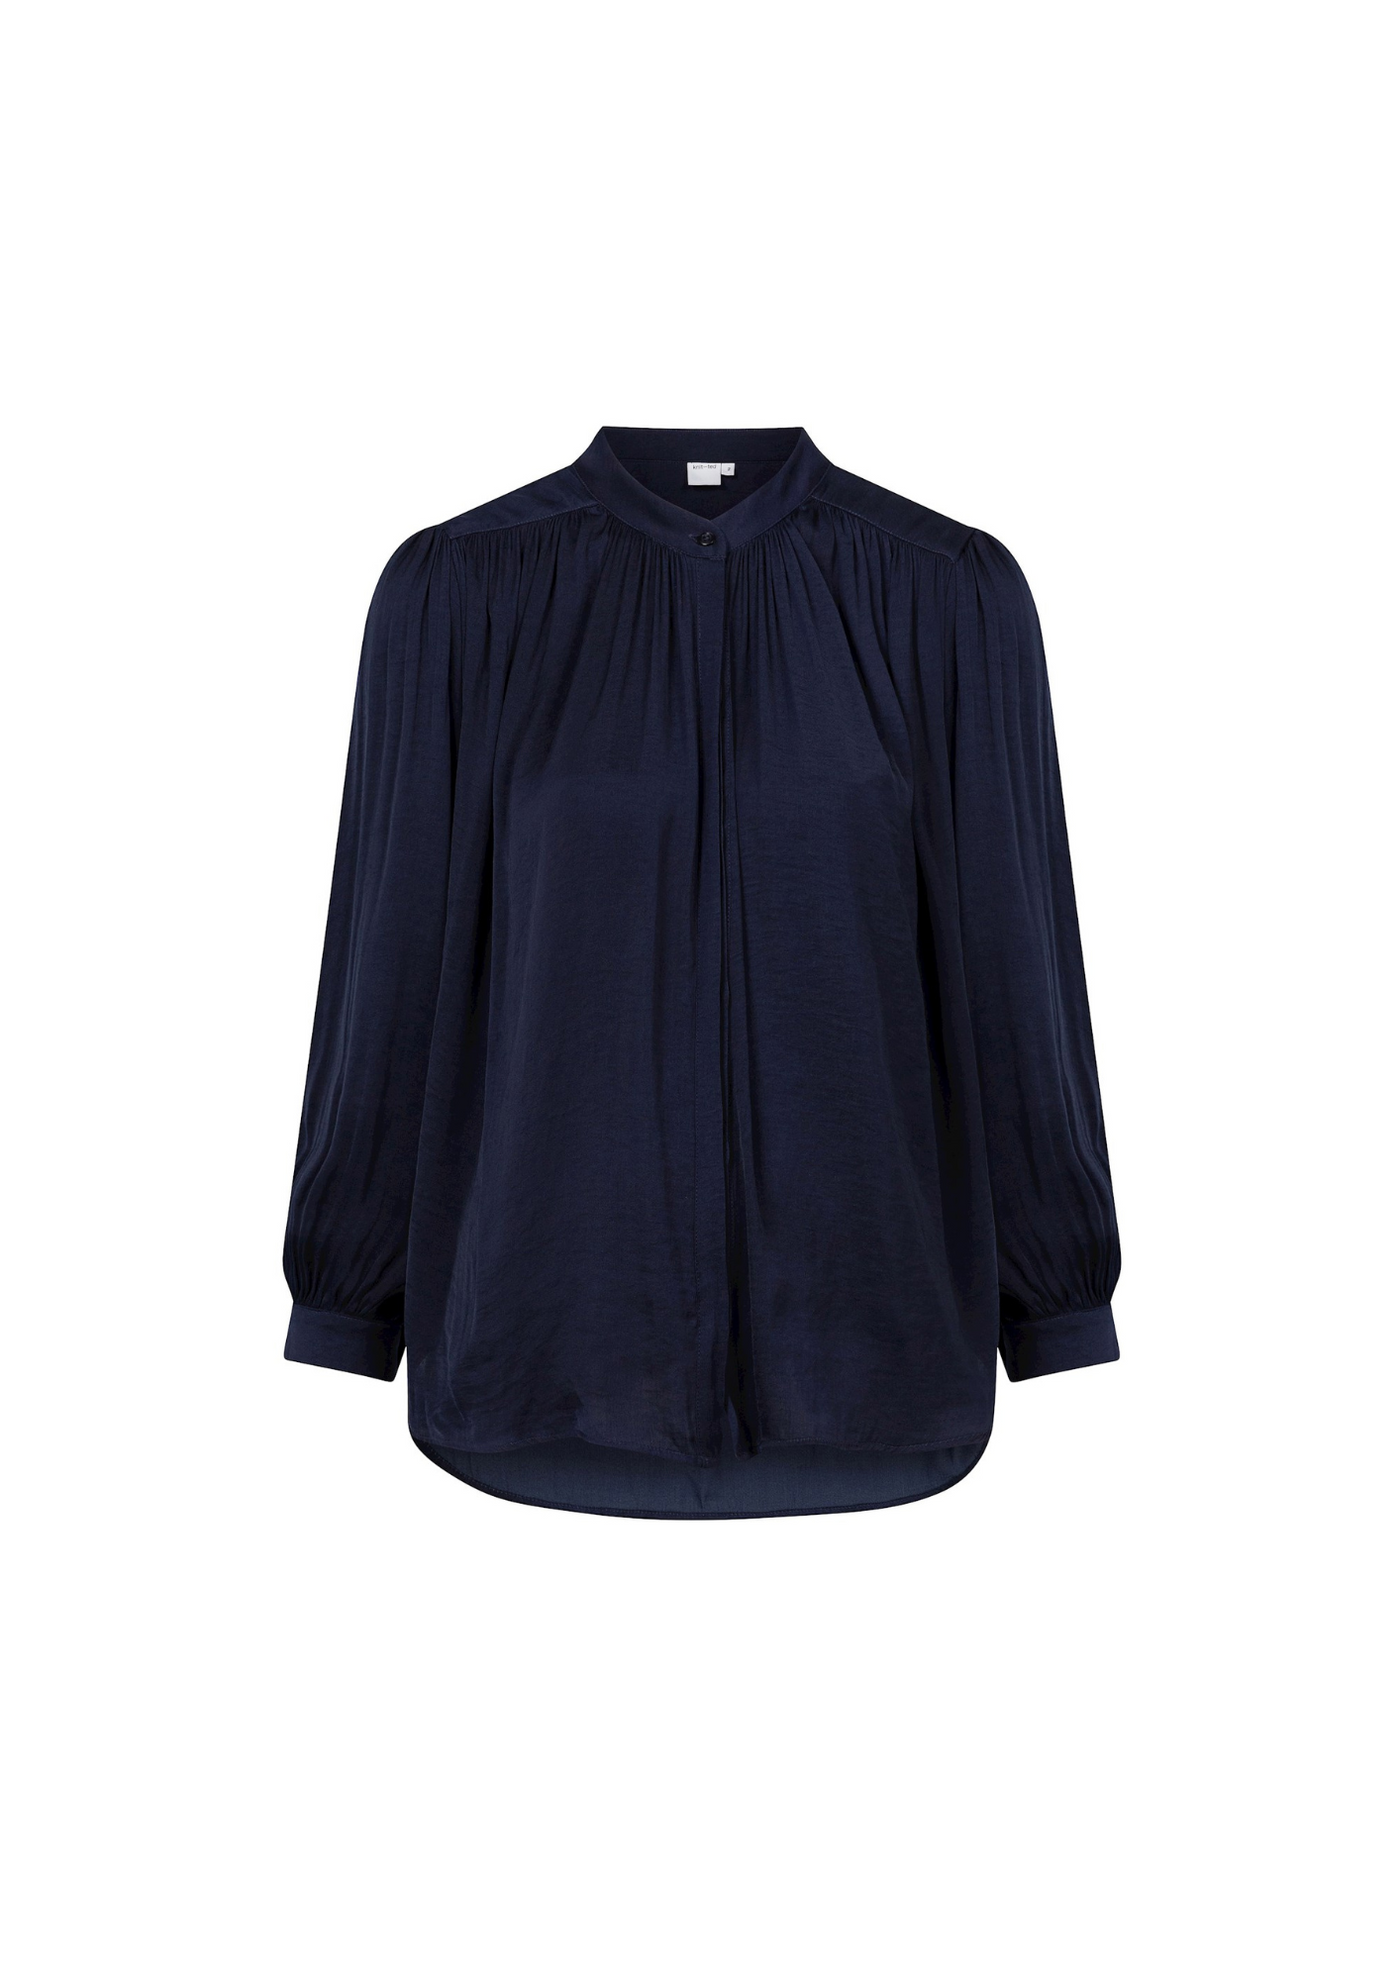 Knit-ted | Rubia Blouse Navy